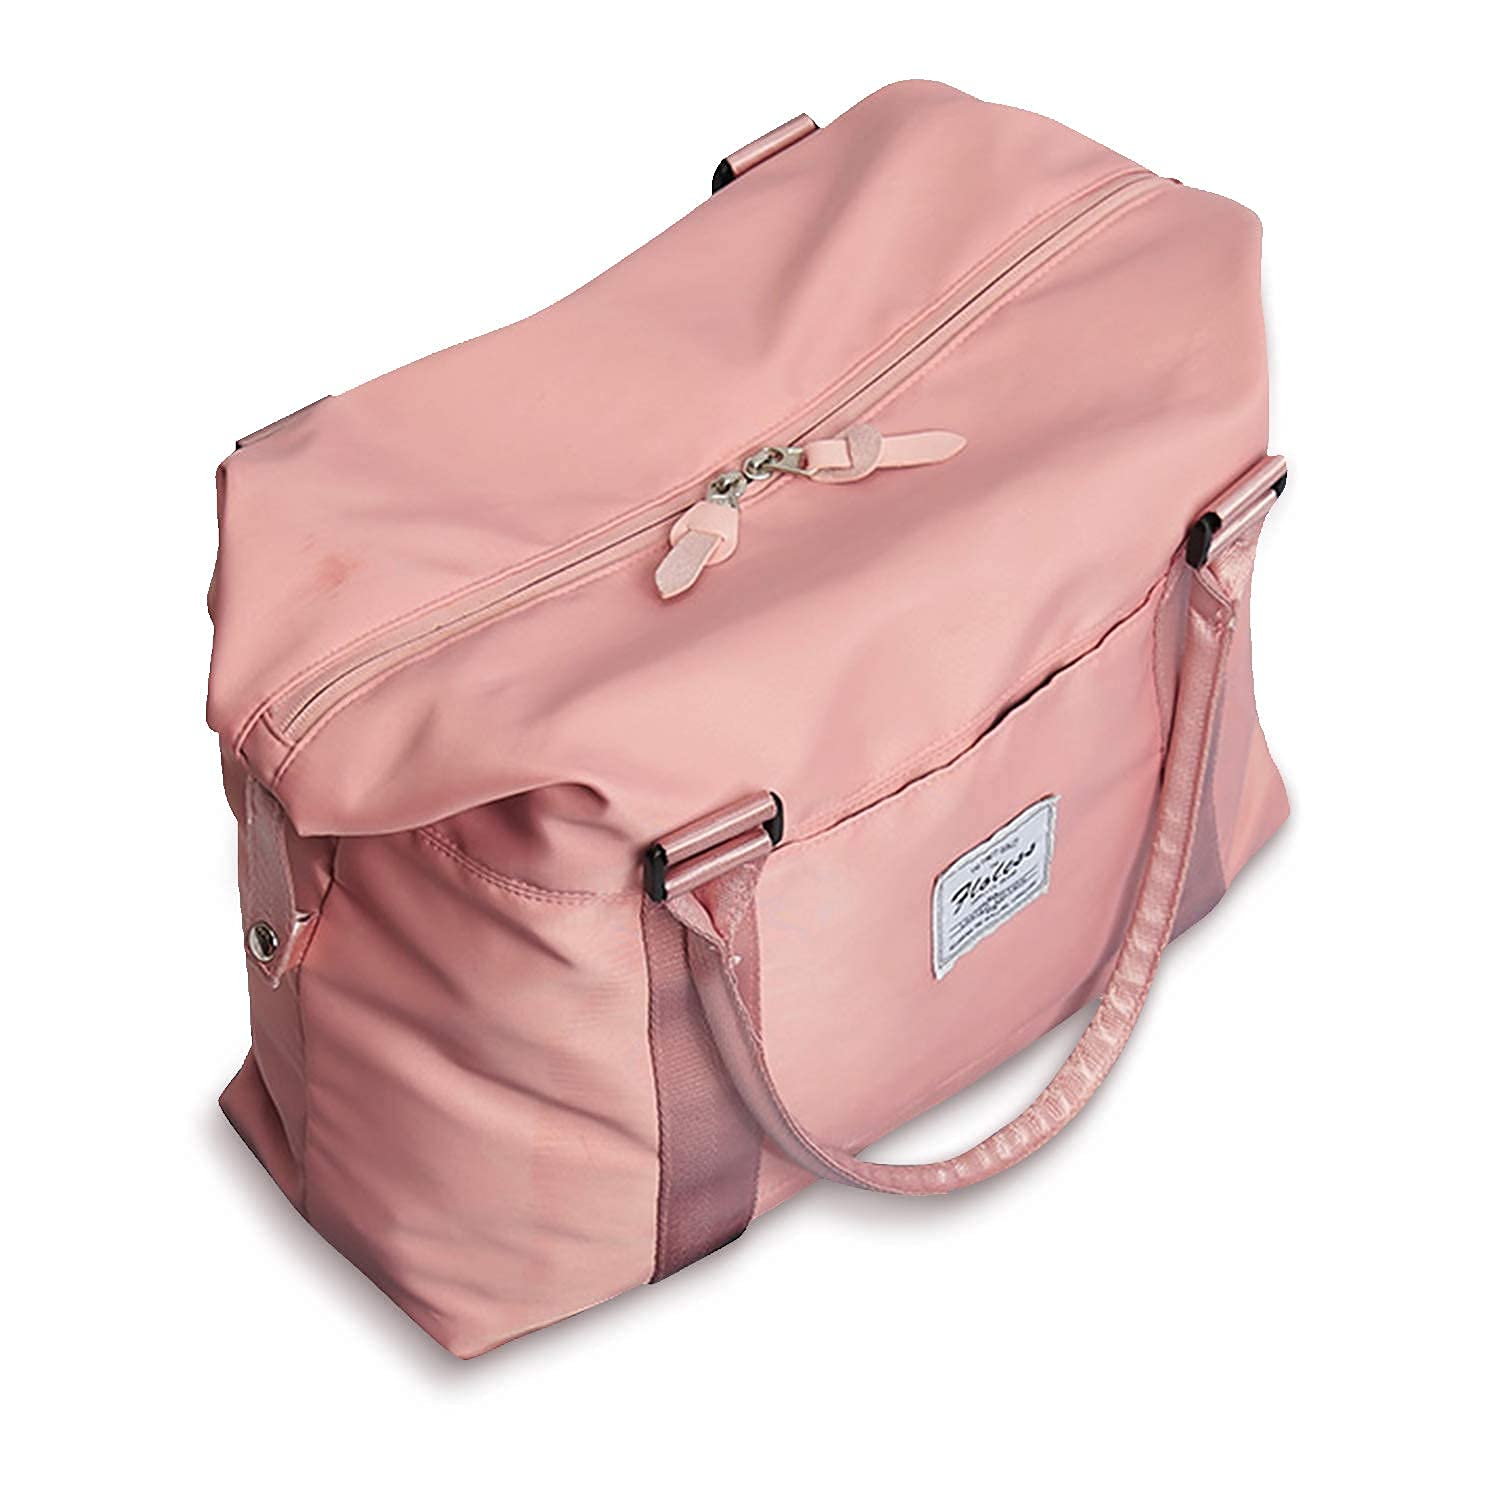 Classic 100% Canvas Sport Gym Bag Round-Shaped Pink Duffel Weekend Bag -  OsgoodwayBag